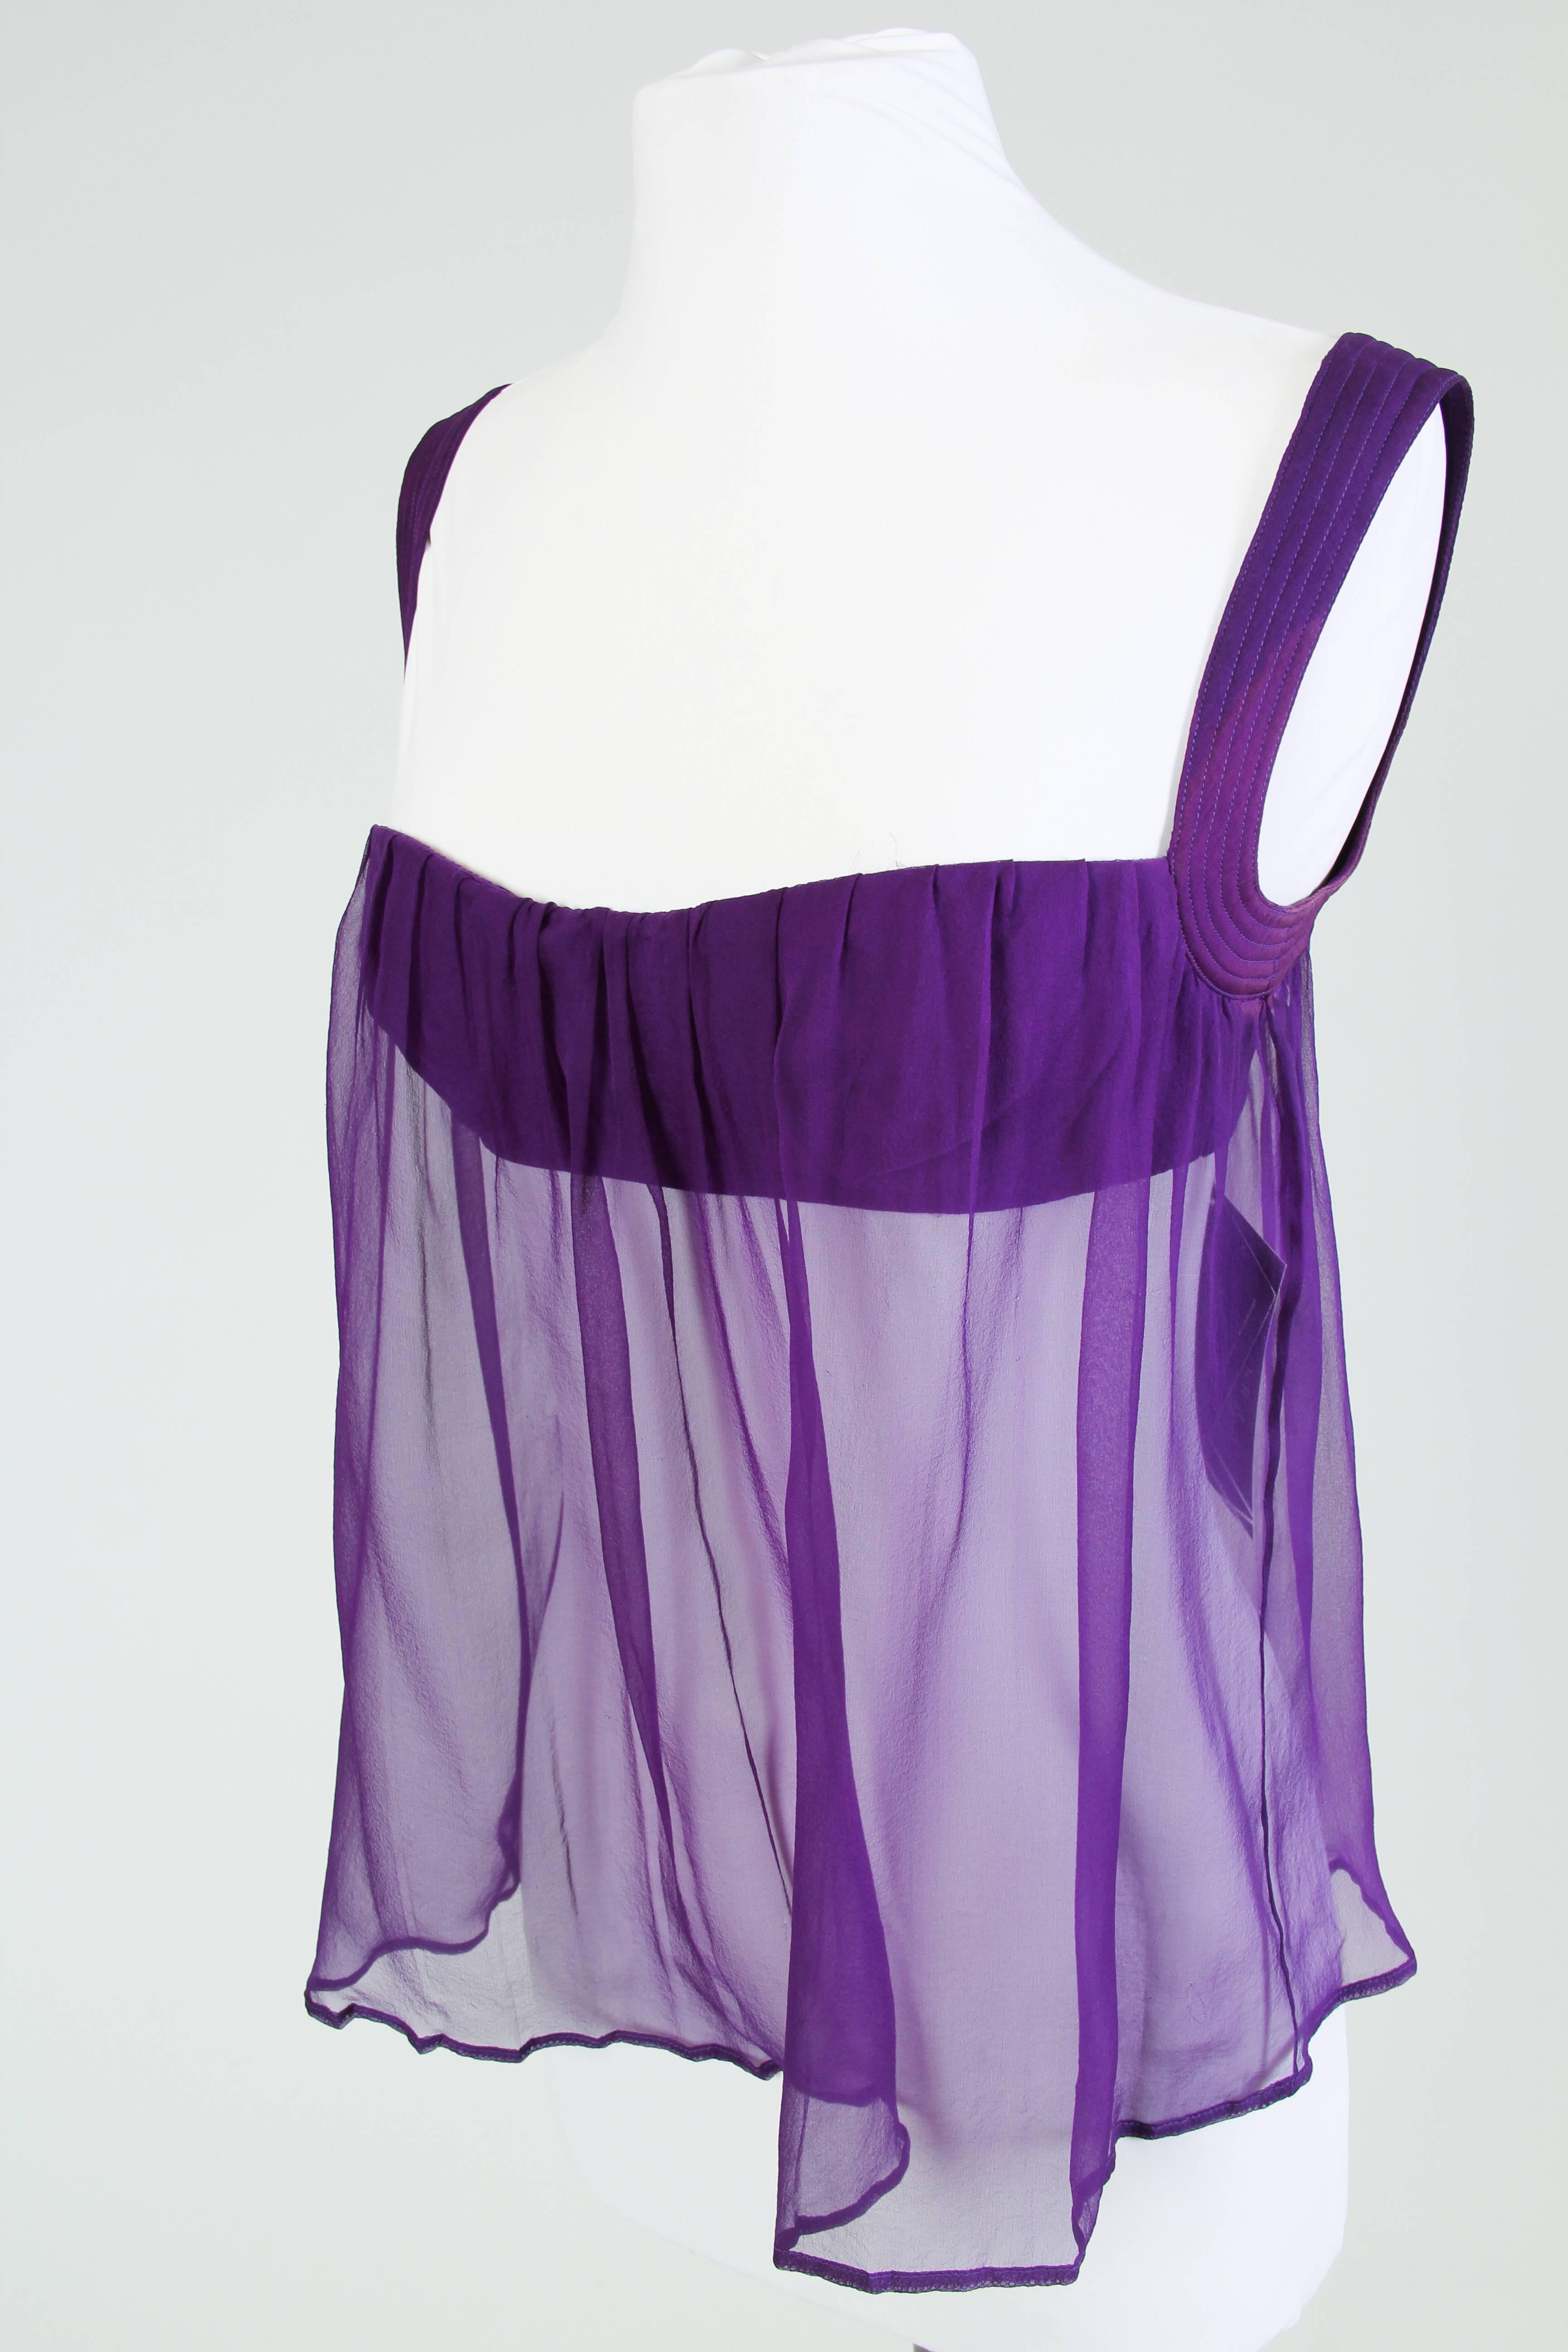 This sheer violet chiffon blouse is by famed design house Versace. The blouse is anchored by a royal purple bandeau-like bustier, supported by quilted silk strap-sleeves. A waterfall of chiffon in the same royal purple is pleated over the top edge